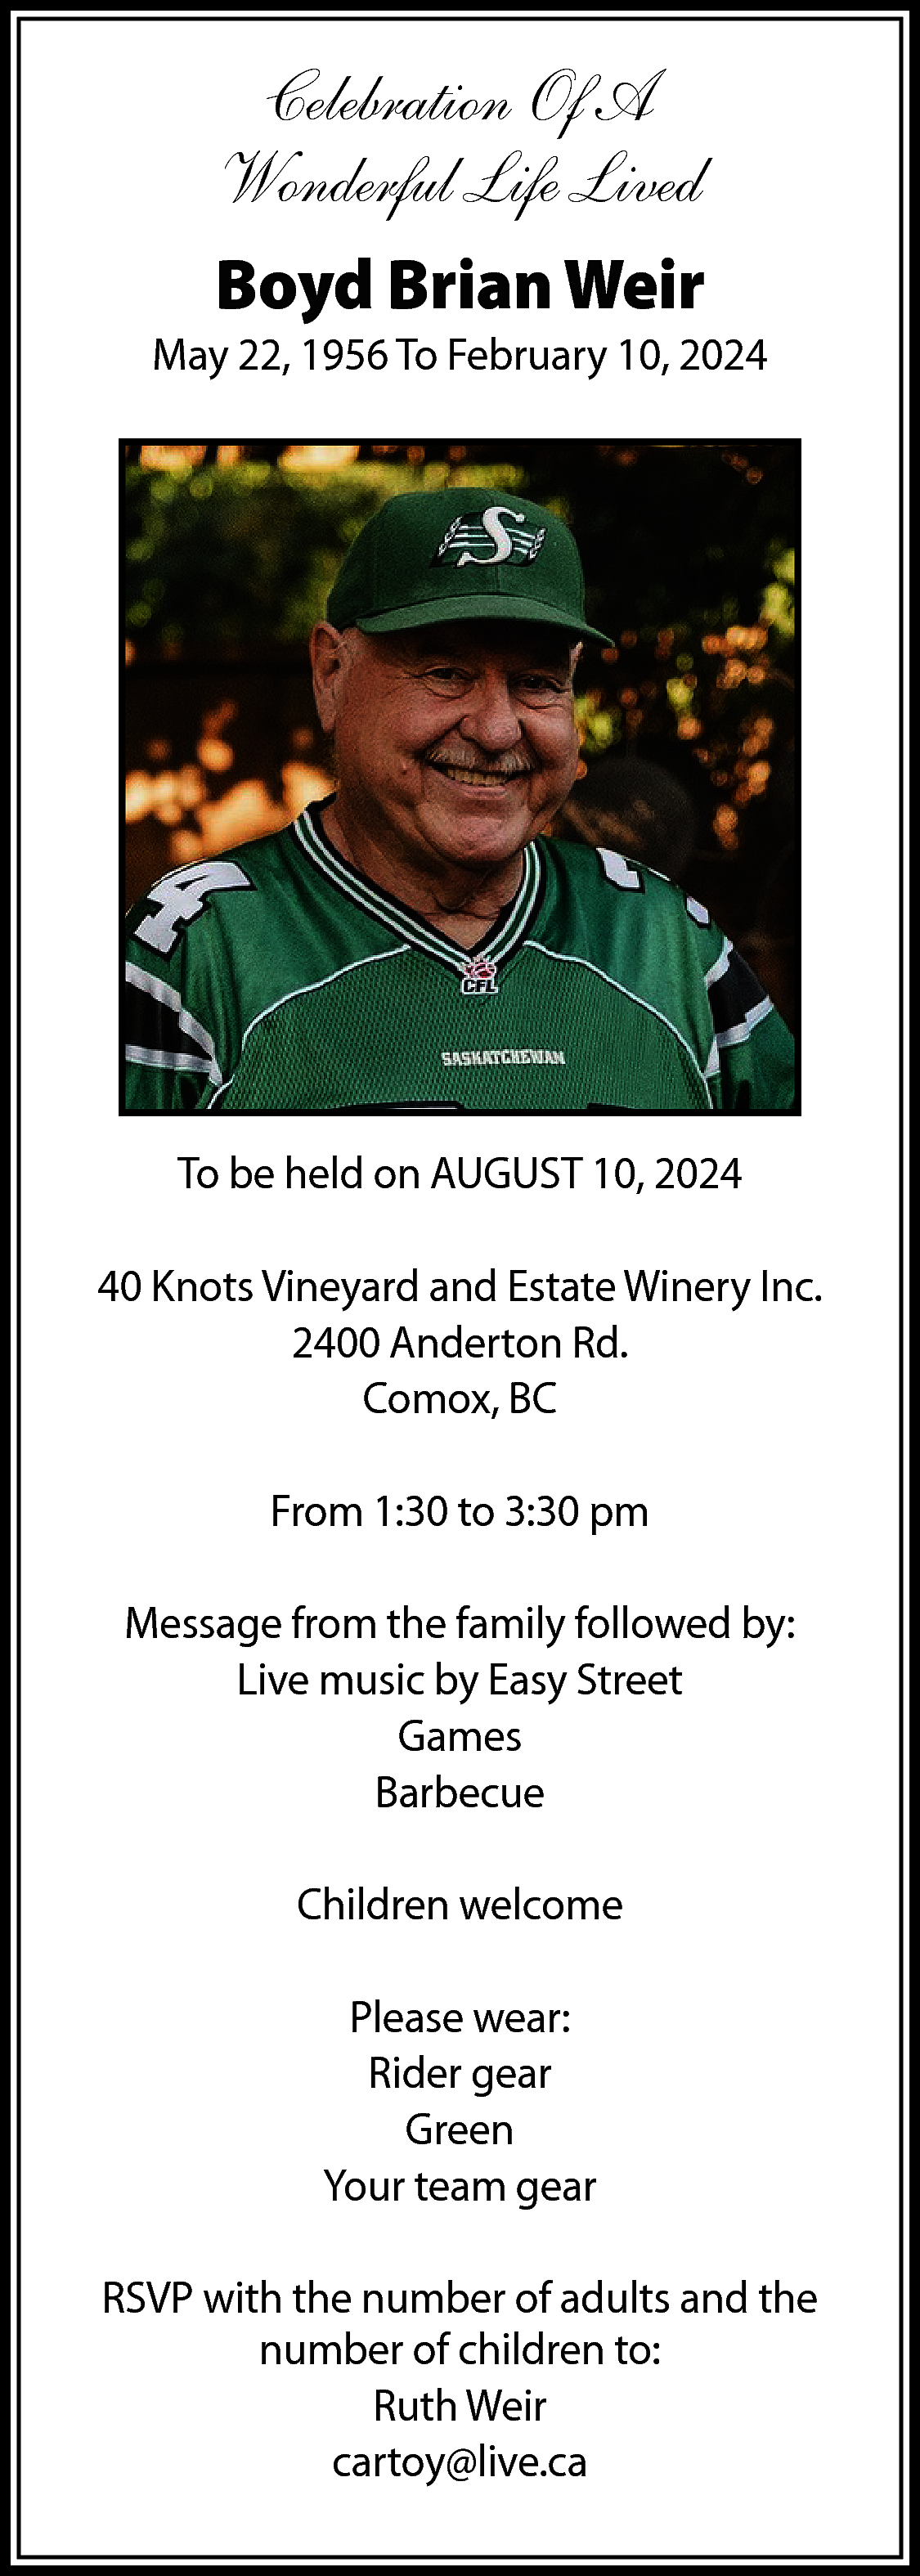 Celebration Of A <br>Wonderful Life  Celebration Of A  Wonderful Life Lived  Boyd Brian Weir    May 22, 1956 To February 10, 2024    To be held on AUGUST 10, 2024  40 Knots Vineyard and Estate Winery Inc.  2400 Anderton Rd.  Comox, BC  From 1:30 to 3:30 pm  Message from the family followed by:  Live music by Easy Street  Games  Barbecue  Children welcome  Please wear:  Rider gear  Green  Your team gear  RSVP with the number of adults and the  number of children to:  Ruth Weir  cartoy@live.ca    